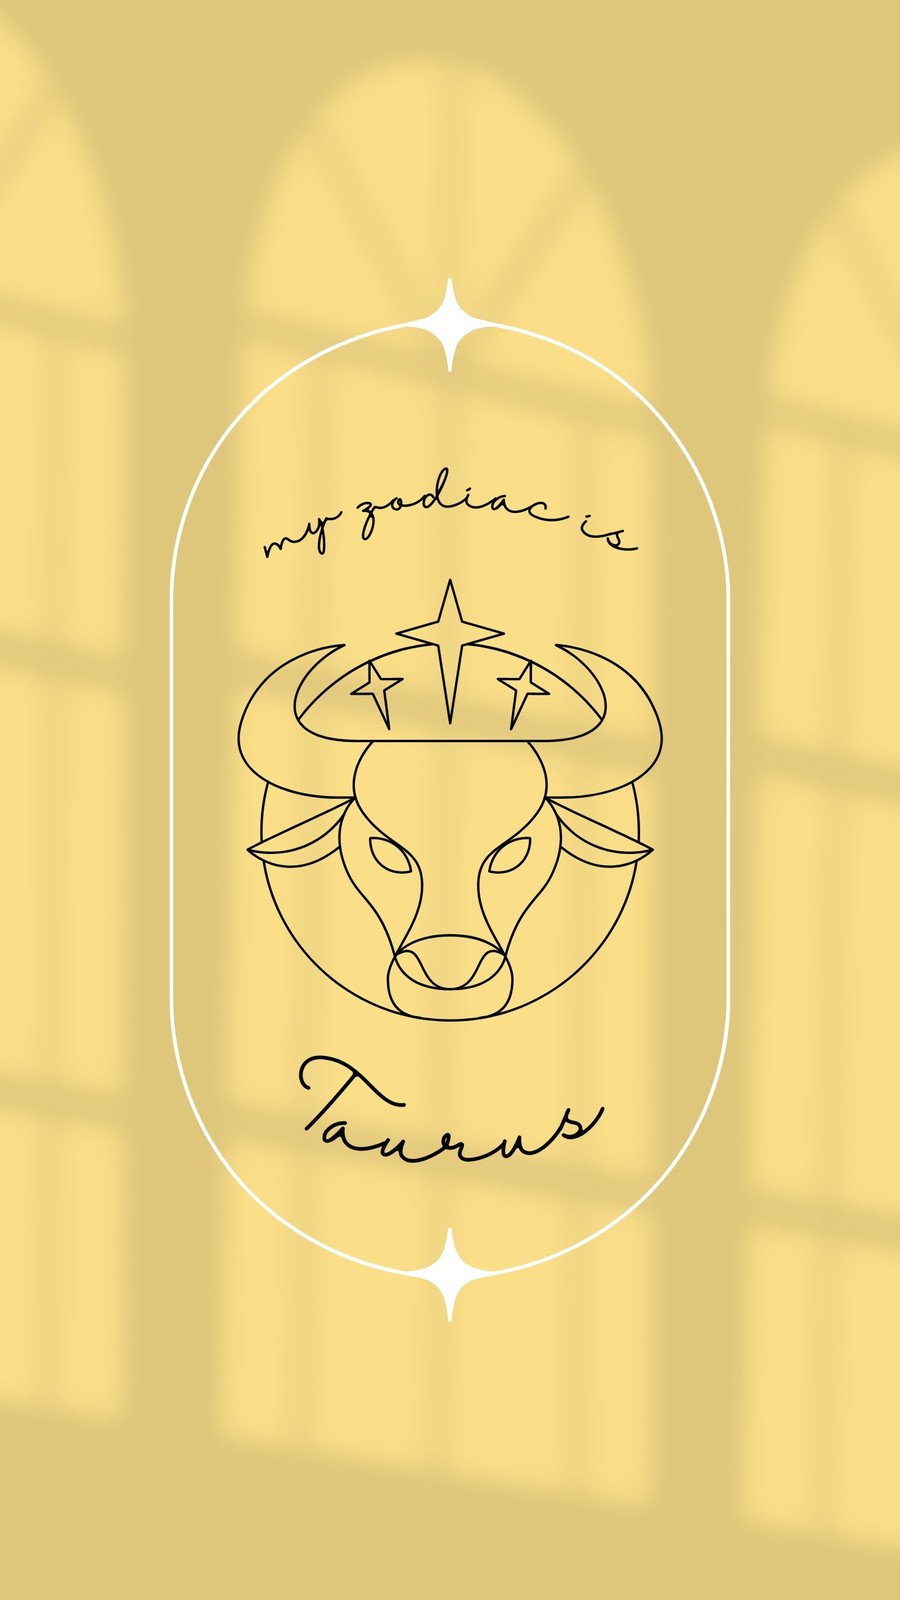 A yellow background with the bull symbol on it - Taurus